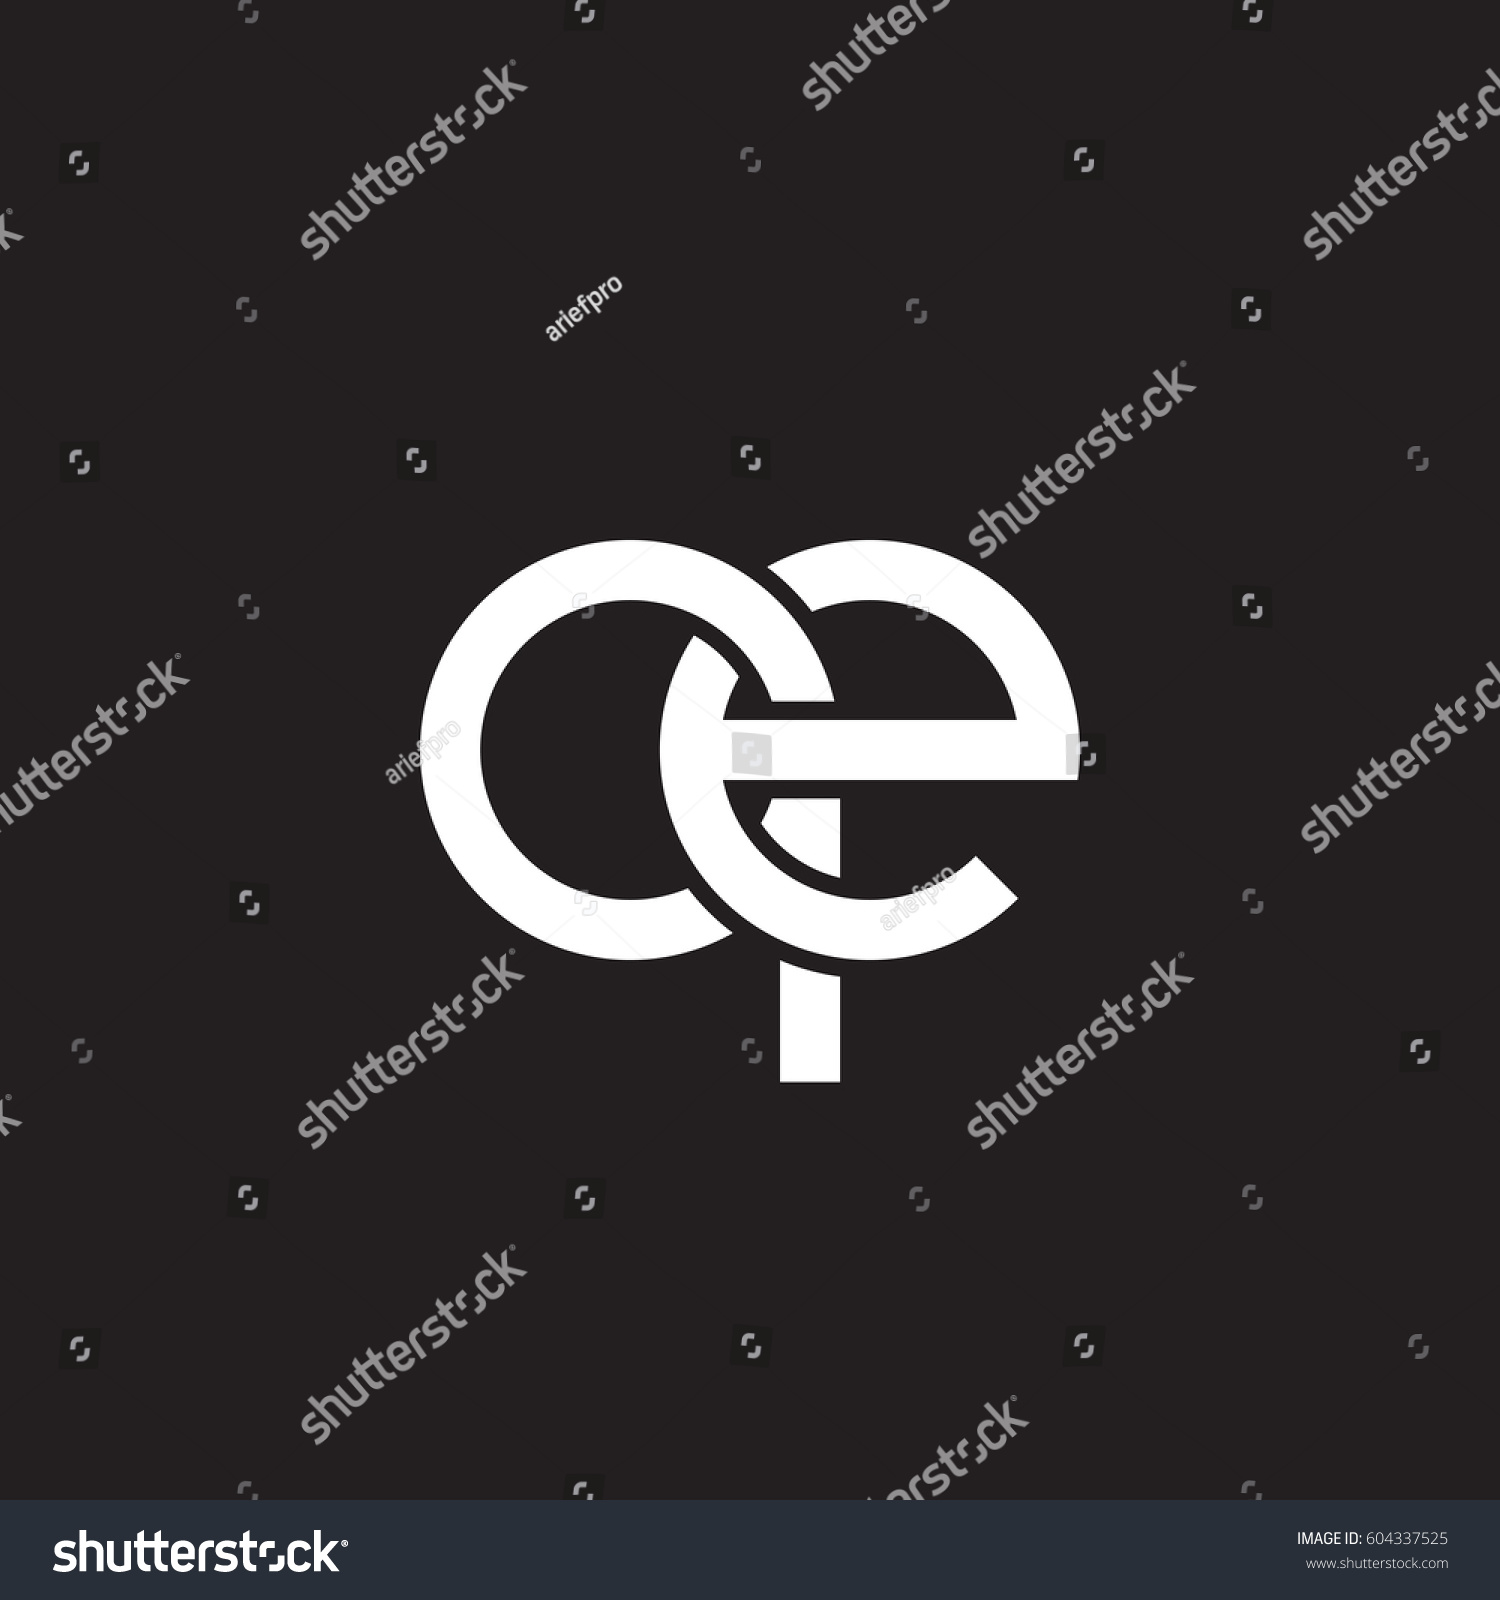 Initial Letters Ep Round Linked Chain Stock Vector (Royalty Free 